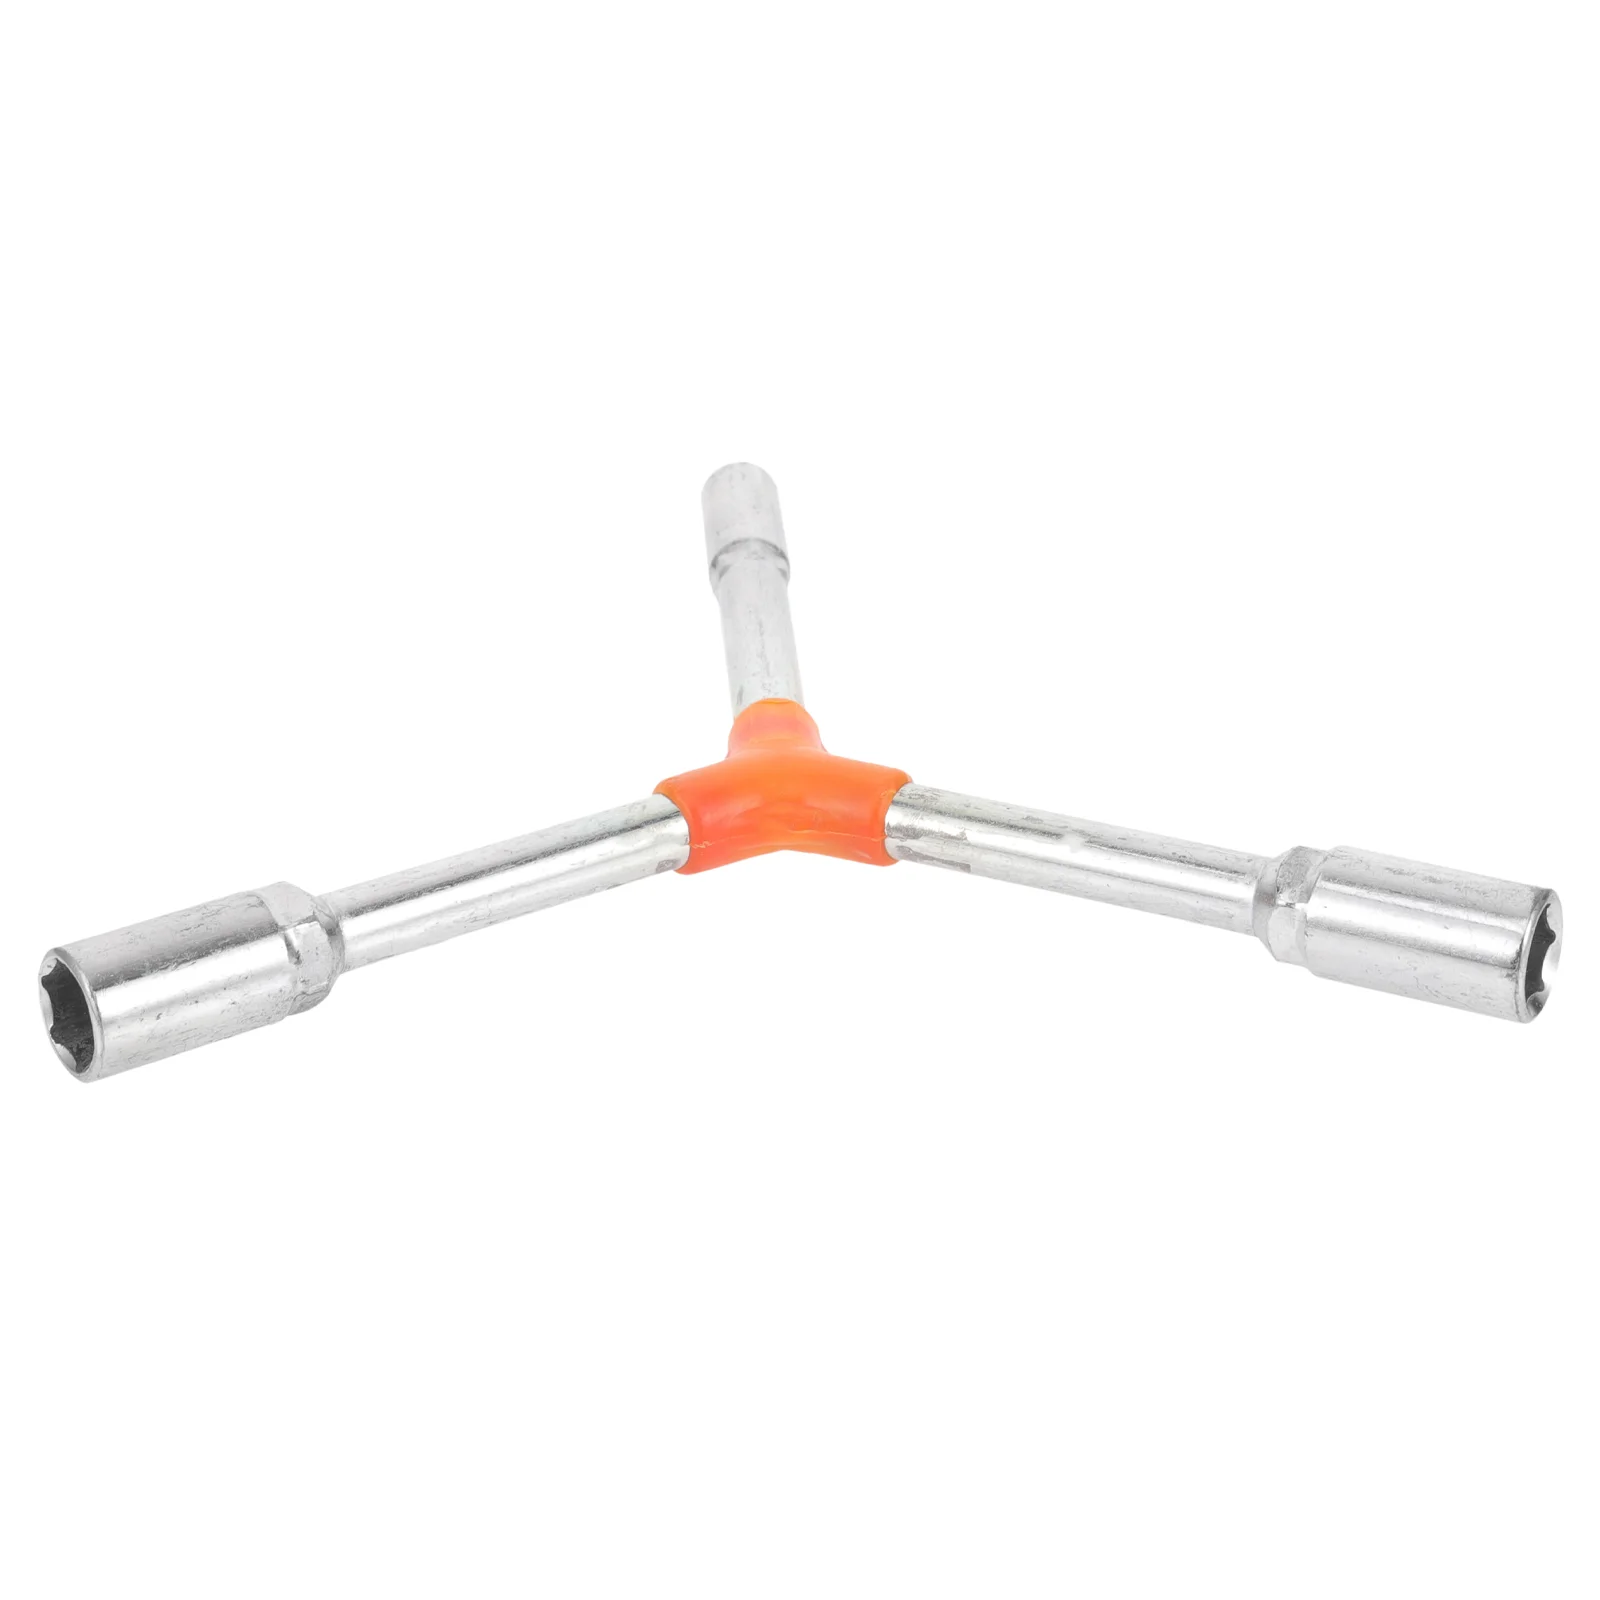 

Cycle Valve Tool Tire Stem Puller Small Valves Core Removal Air Bike Repair Remover Reusable Tyre Removers Car Tools